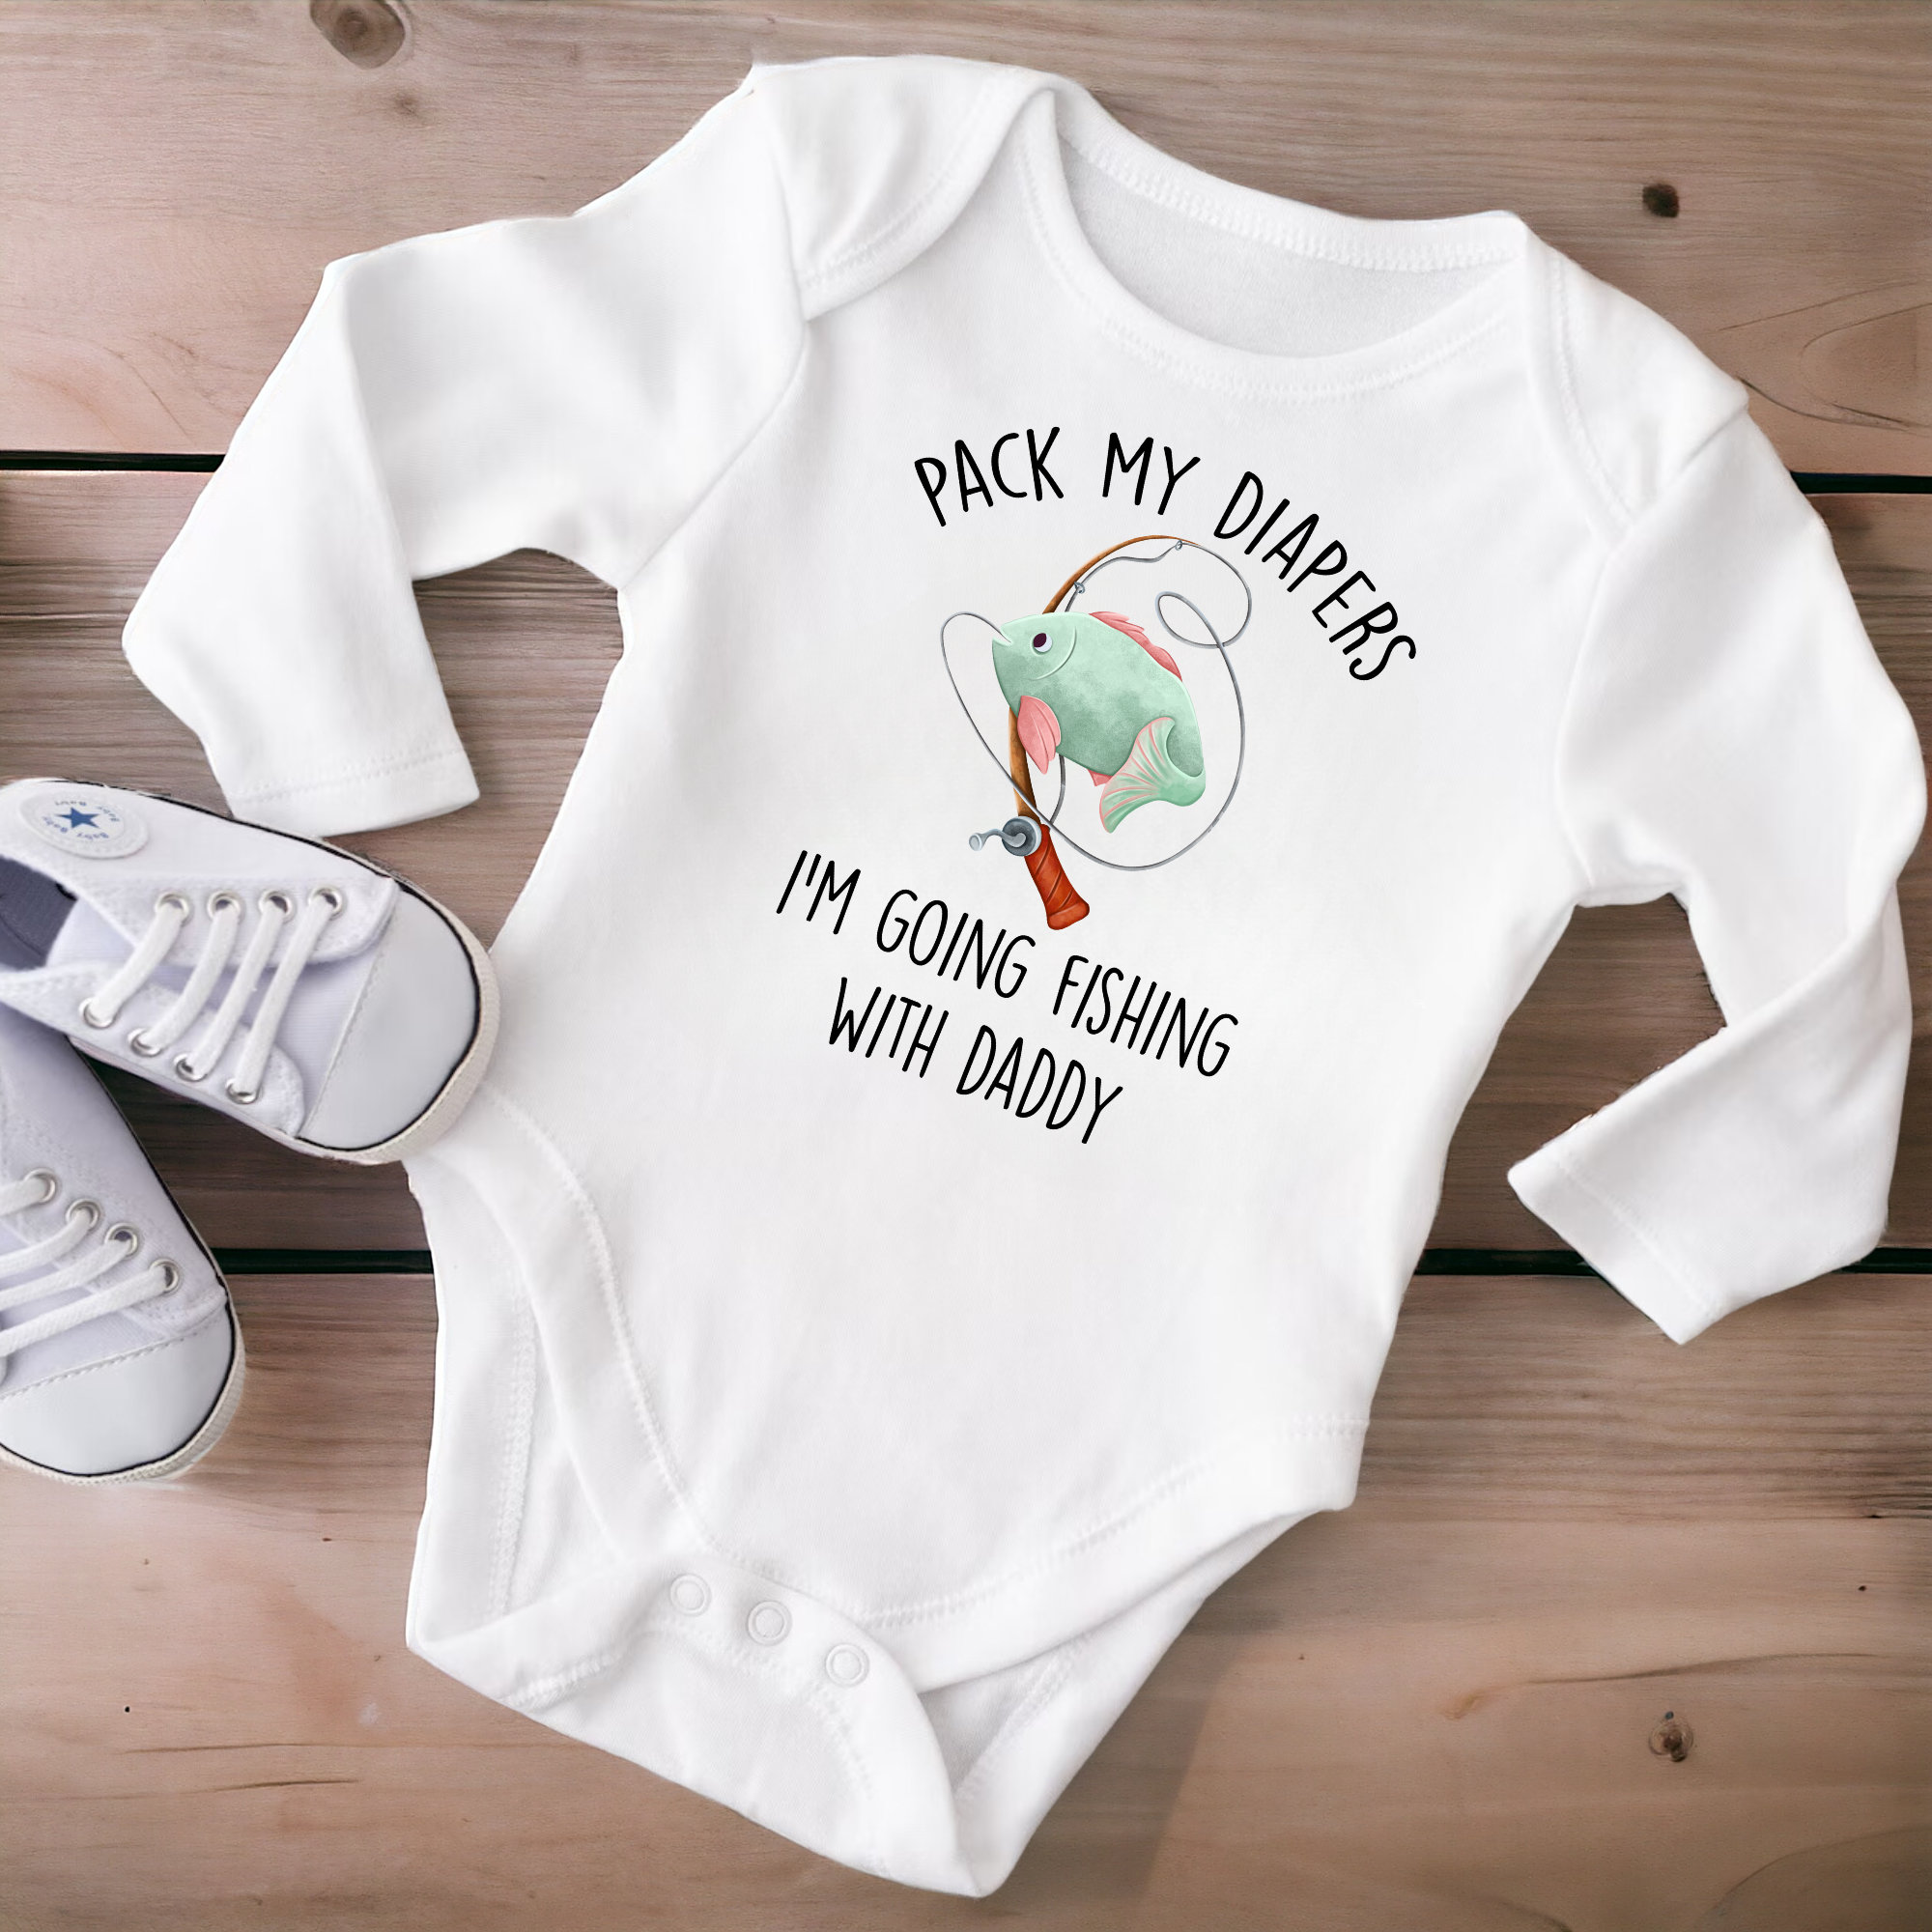 Girls Fishing Coming Home Outfit, Daddy's Fishing Buddy Personalized Girls  Baby Set, Custom Newborn Hospital, Baby Shower Gift, Layette 